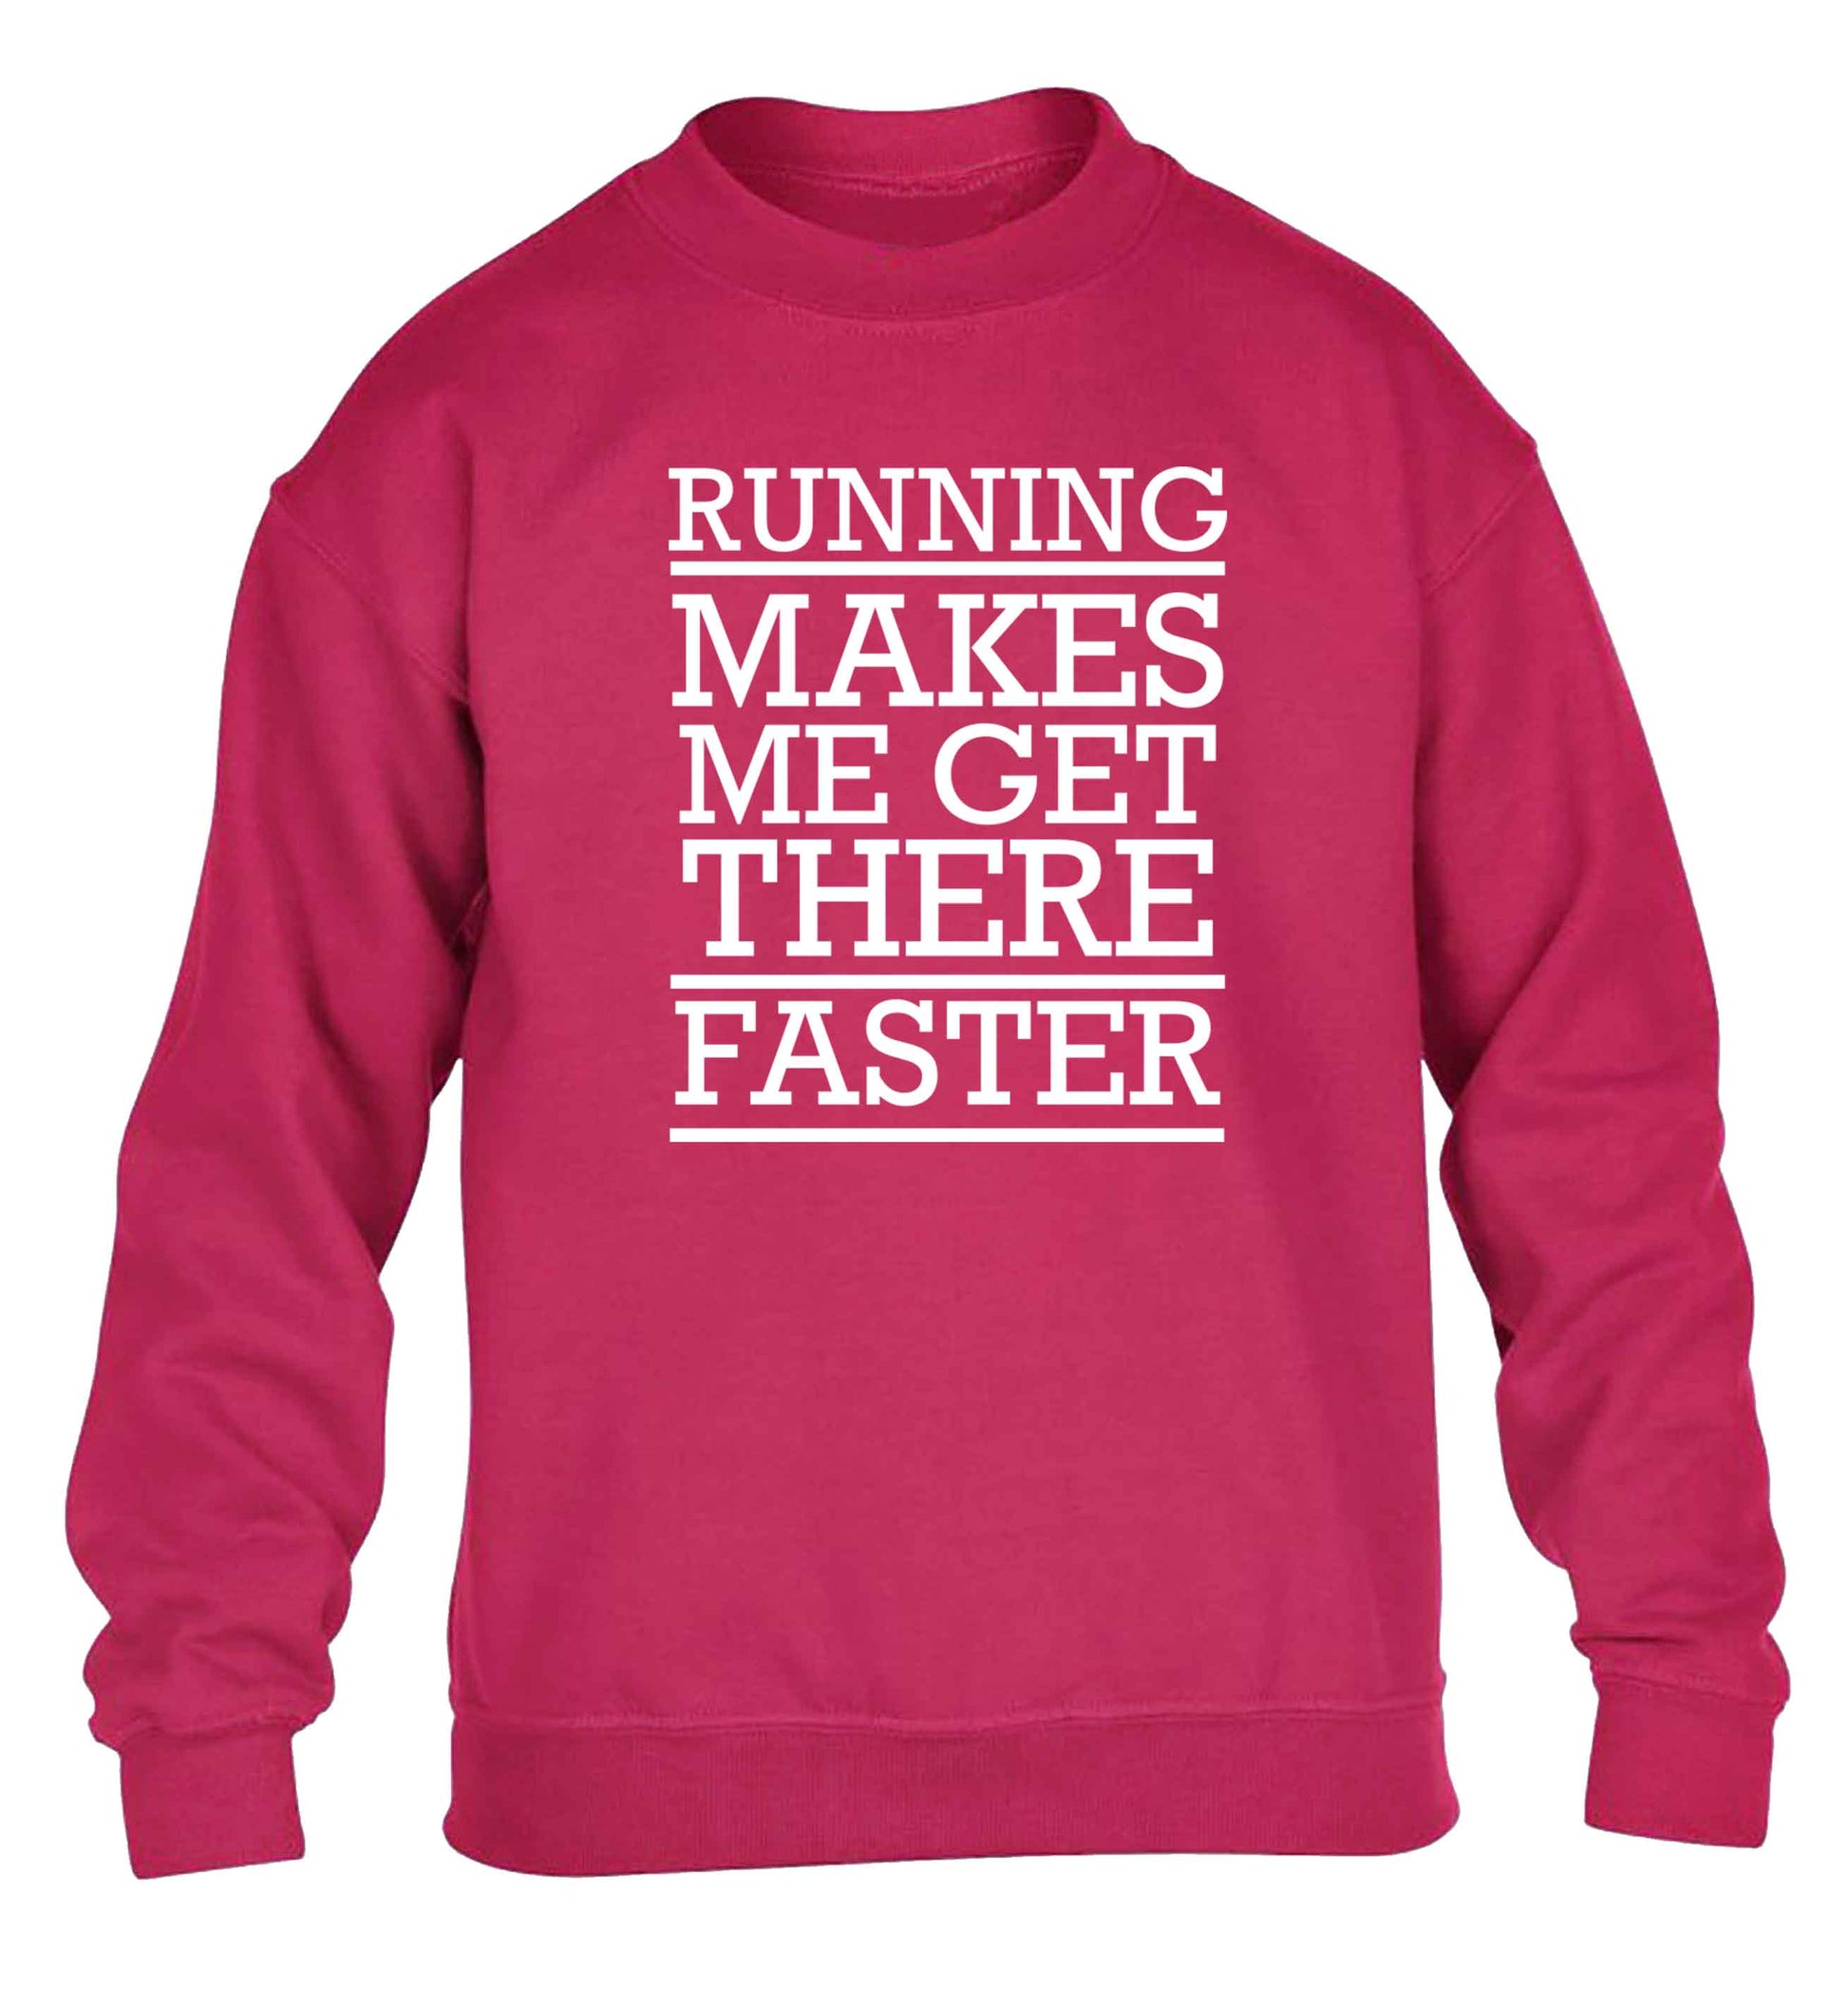 Running makes me get there faster children's pink sweater 12-13 Years